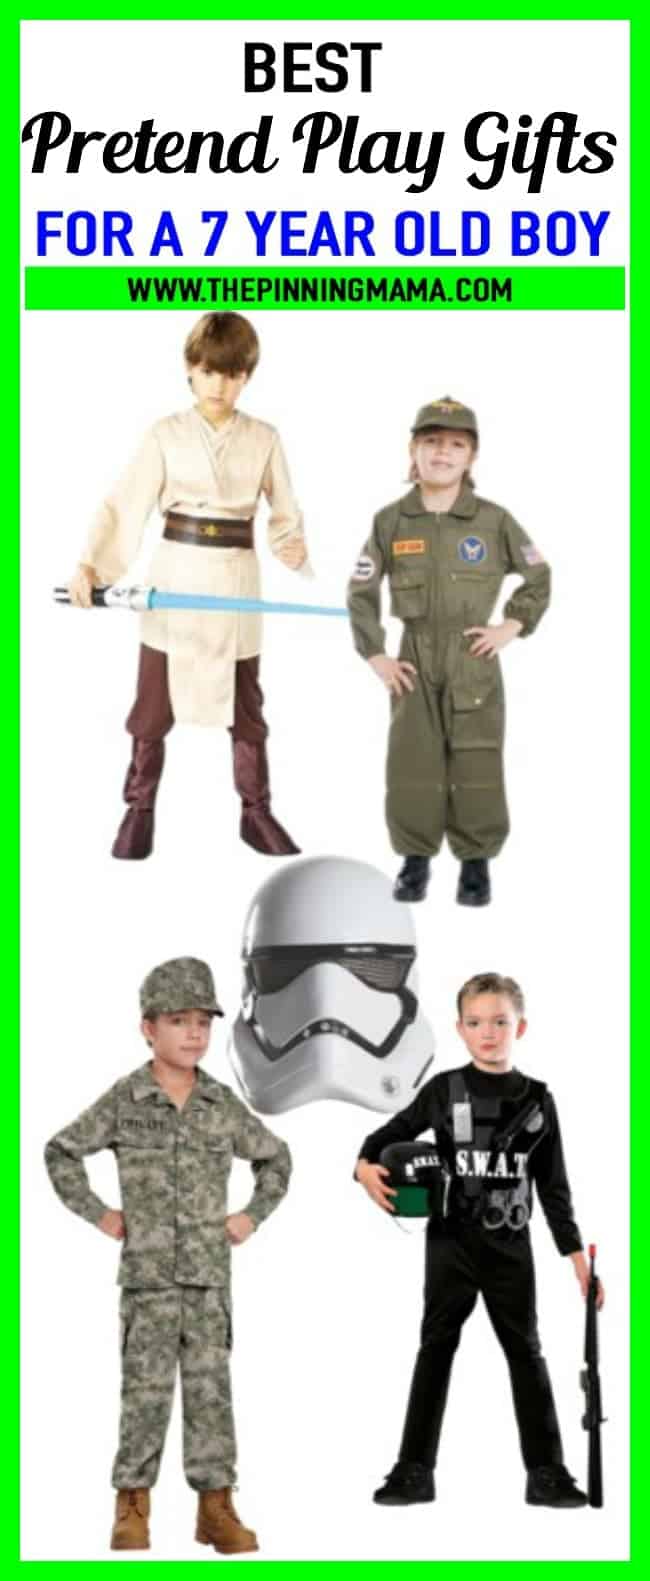 Best  gift ideas for a 7 year old boy who loves dress up and pretend play! Includes pilot costumes, army, swat, star wars and more! Great ideas for birthday presents and Christmas presents